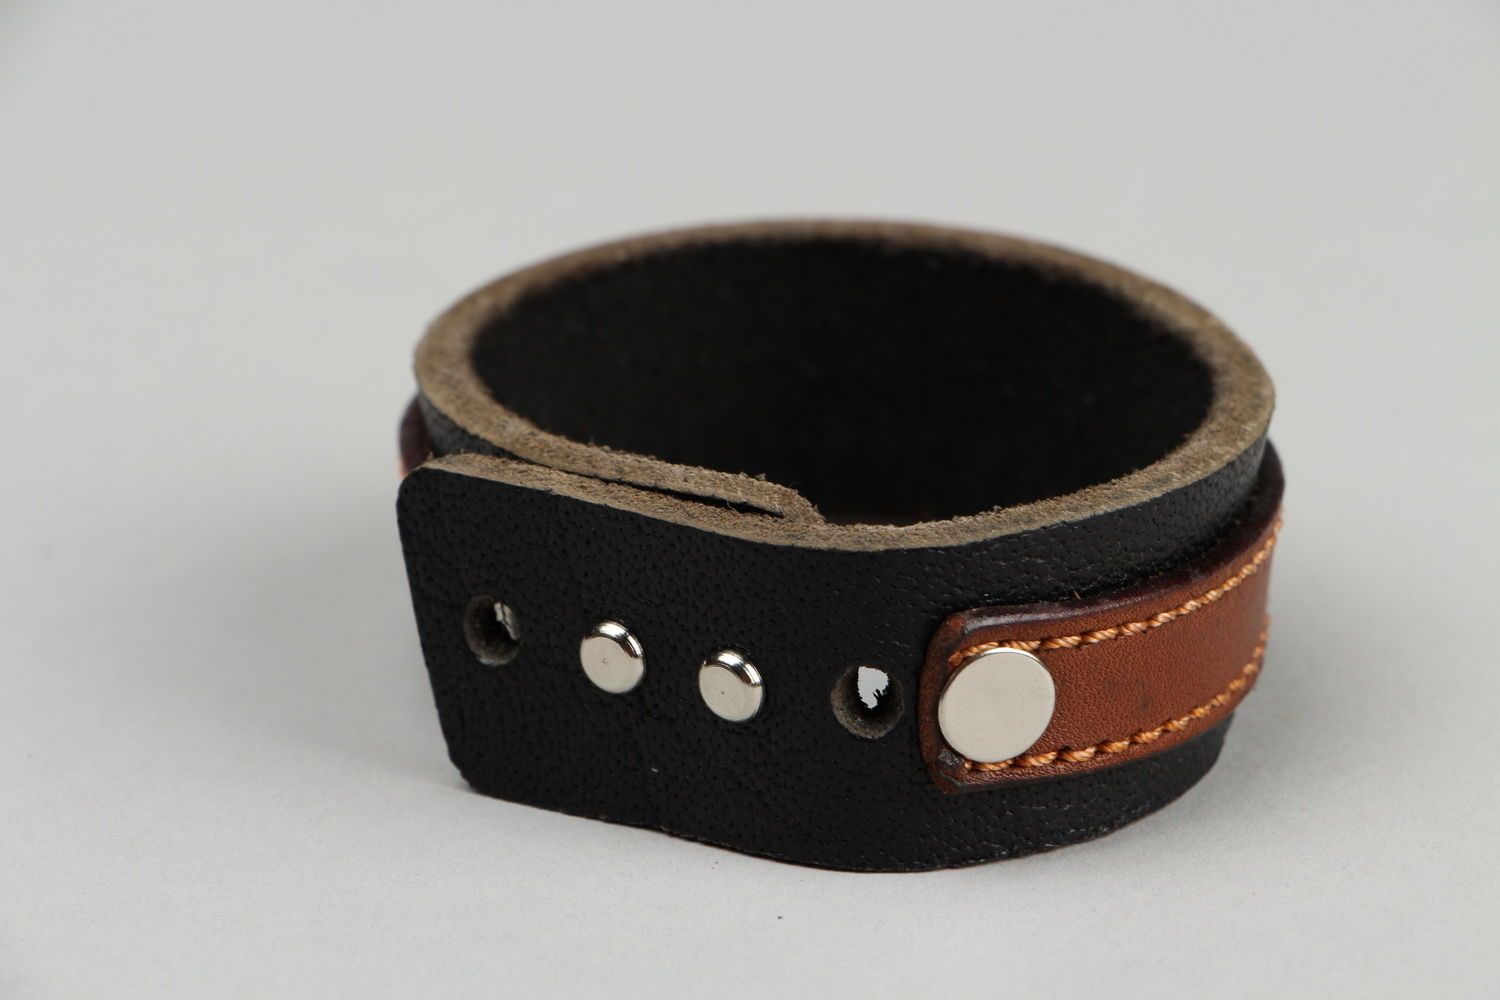 Bracelet of the two types of leather photo 4